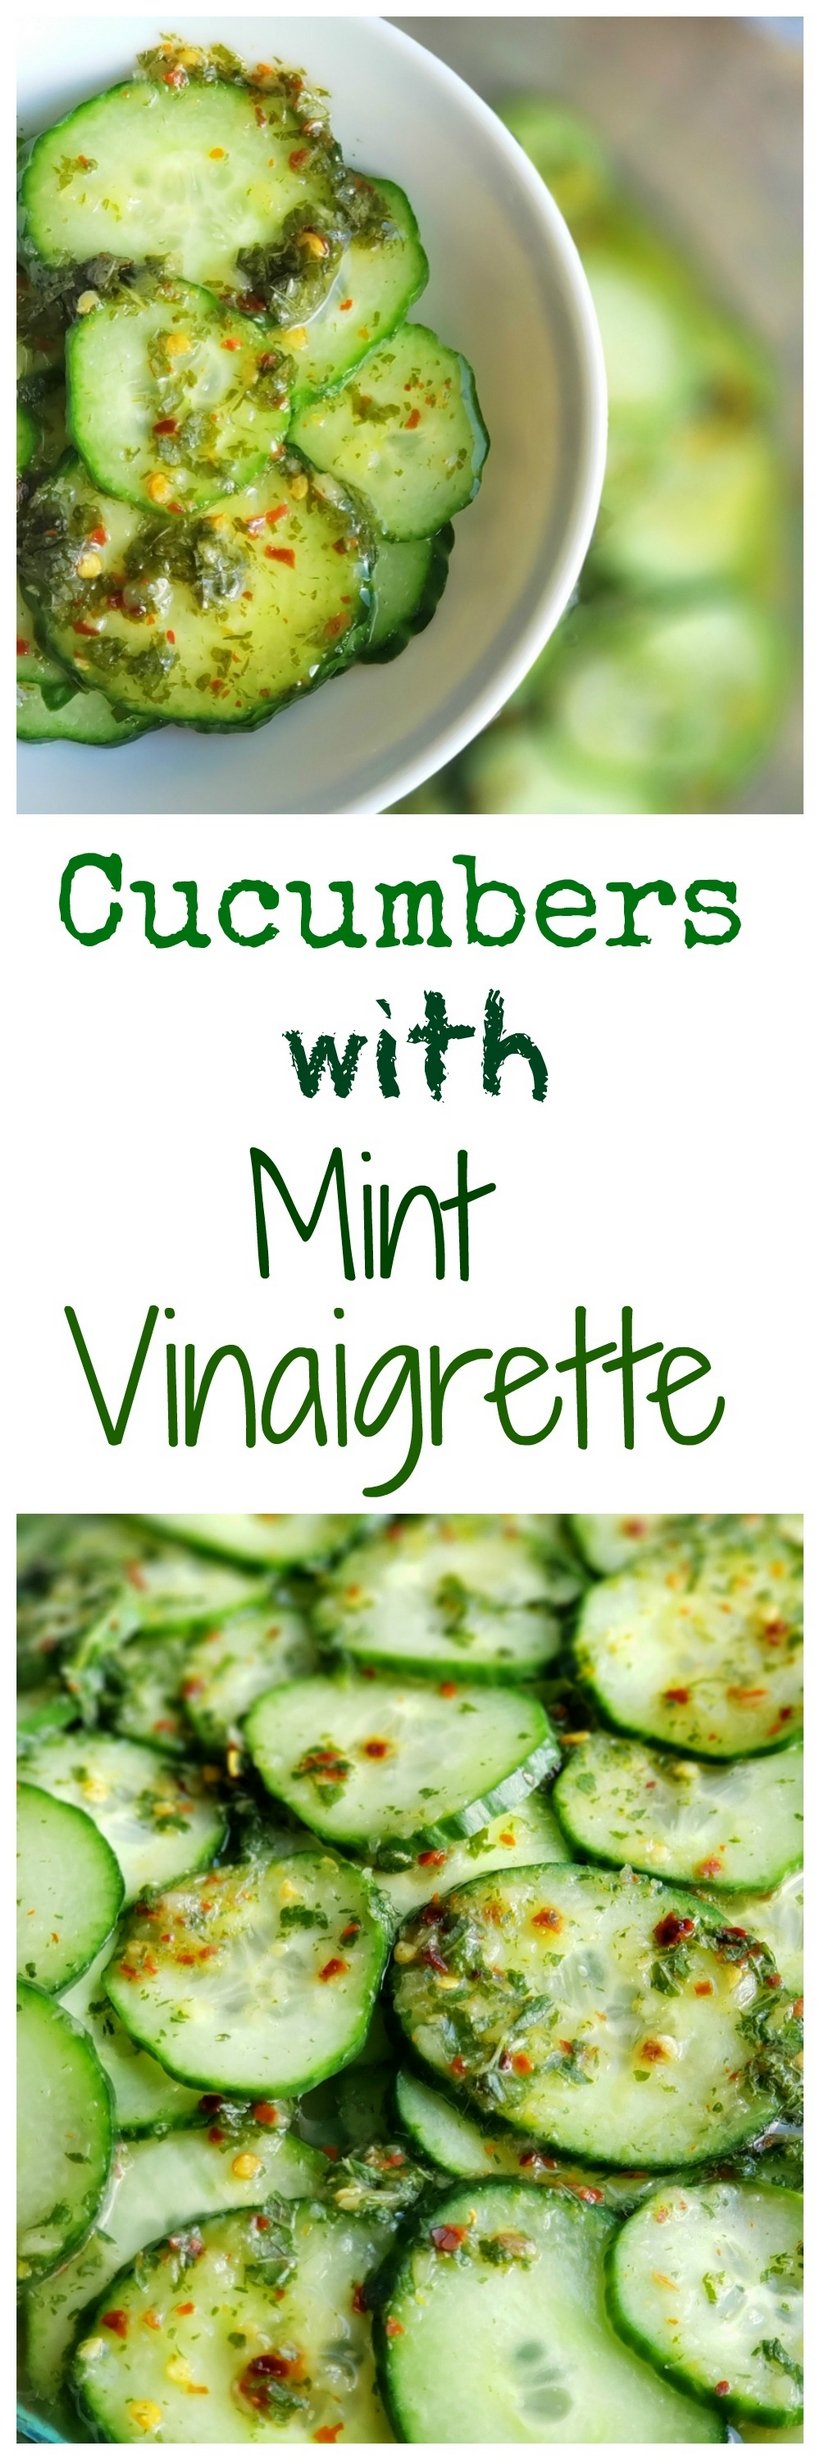 Cucumbers with Mint Vinaigrette in text and two photos of sliced cucumbers with vinaigrette.